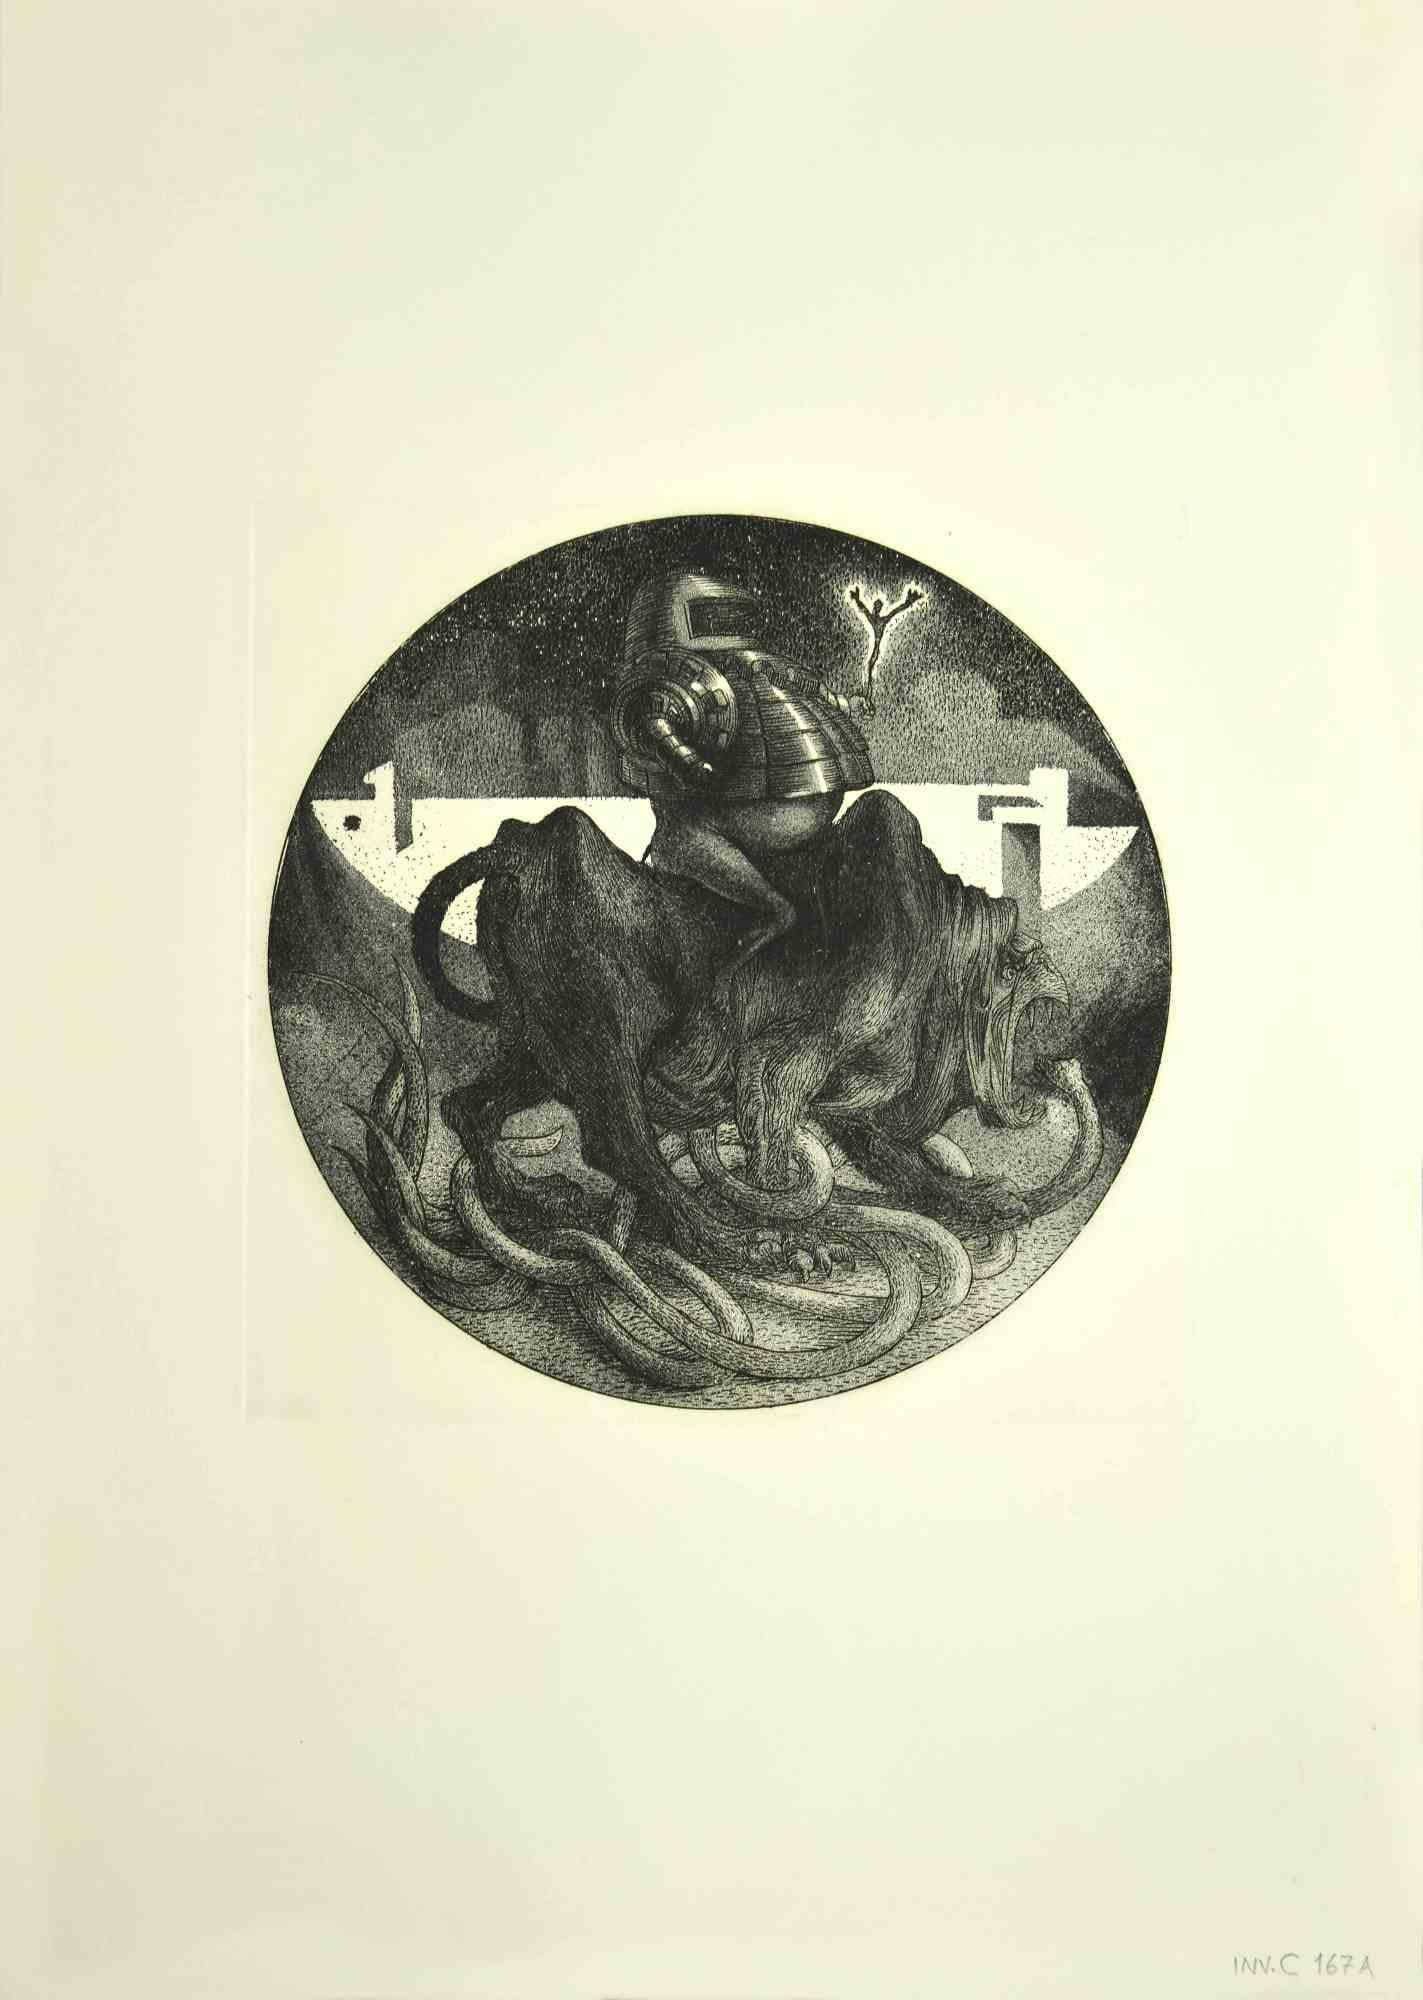 Eroe Vittorioso is an original artwork realized  in 1971  by the italian Contemporary artist  Leo Guida  (1992 - 2017).

Original black and white etching on ivory-colored cardboard.

Nicht unterzeichnet.

In this artwork is represented an victorious